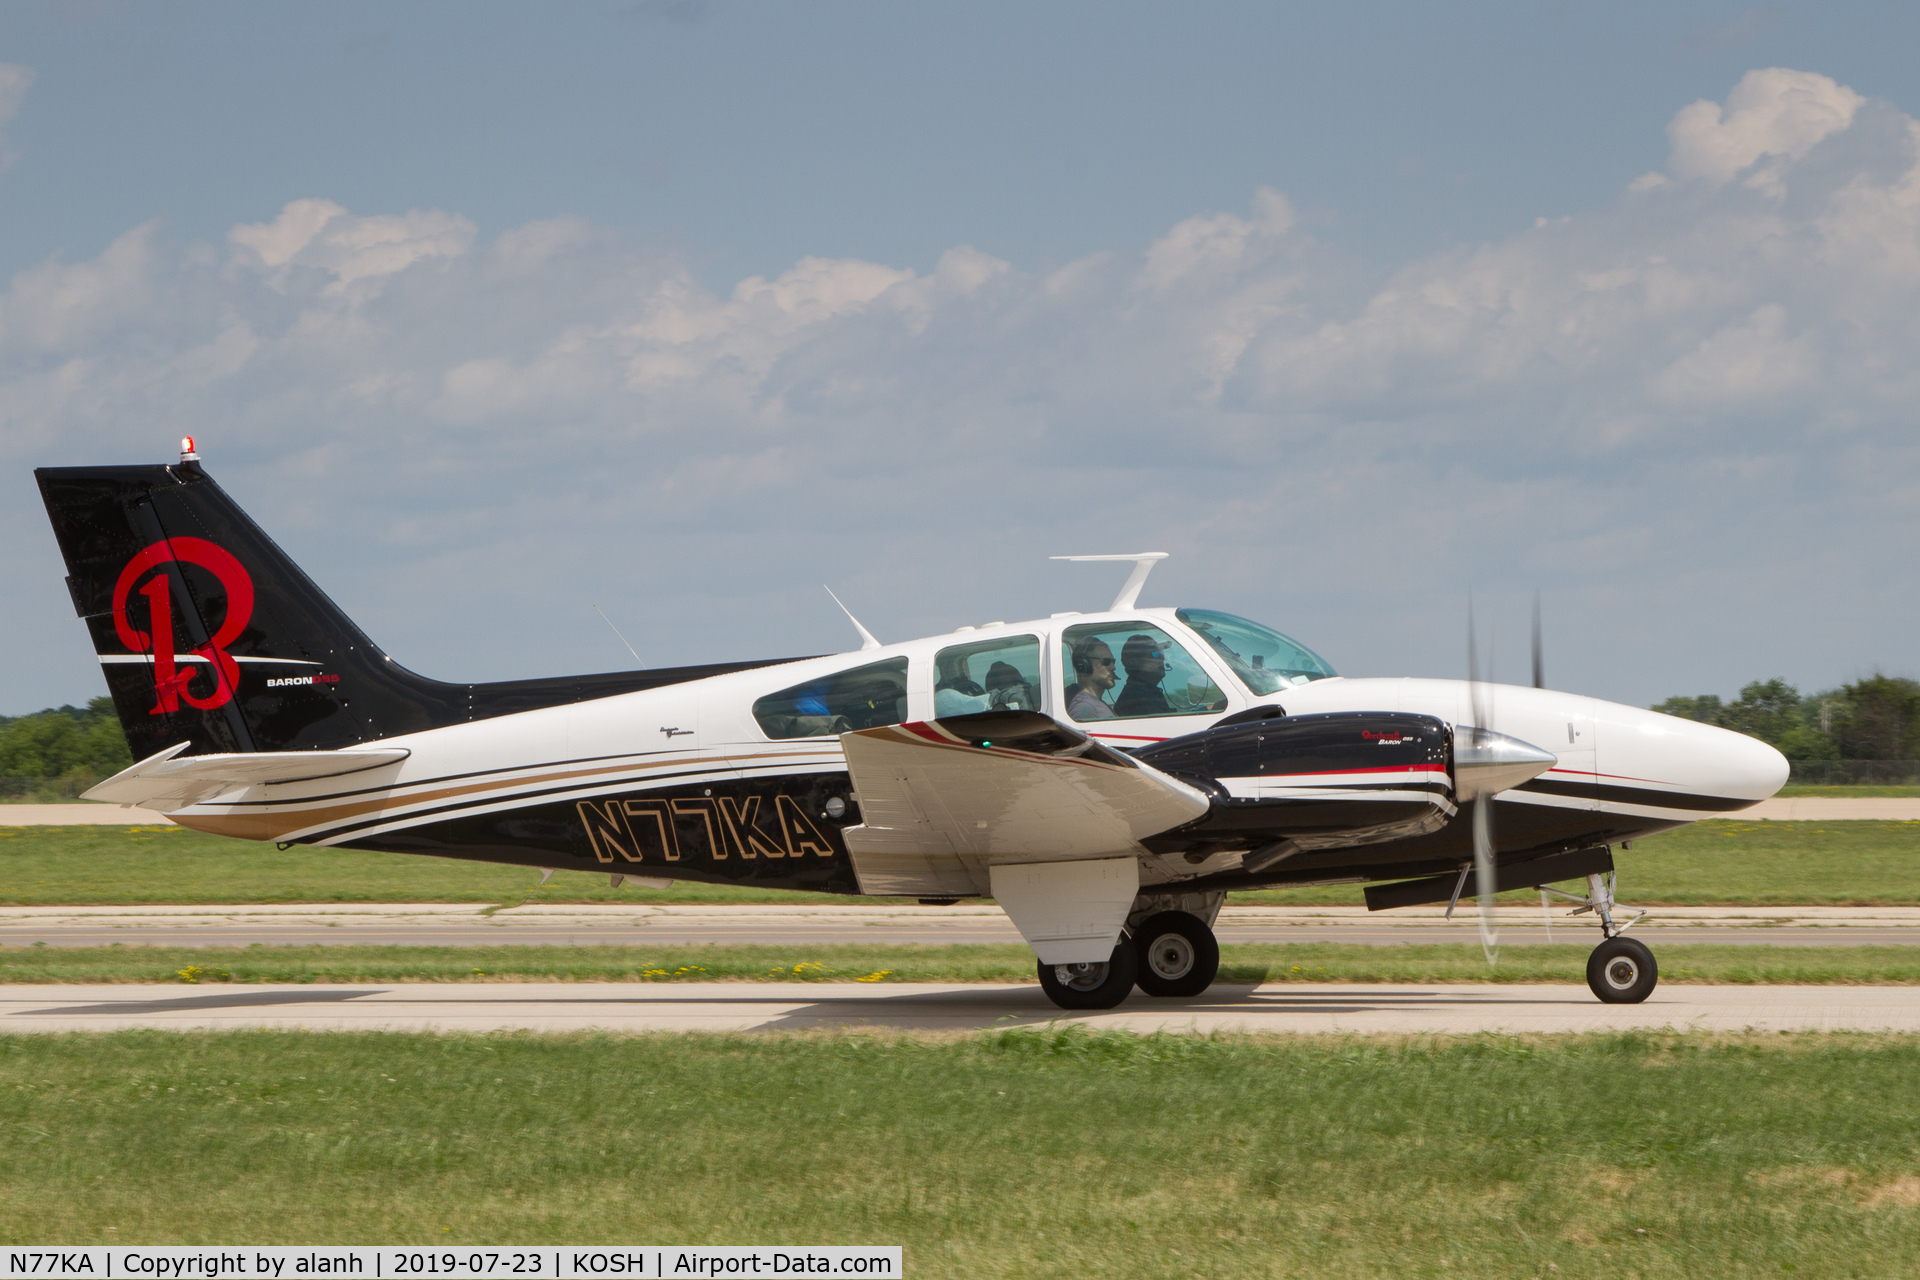 N77KA, 1969 Beech D55 Baron C/N TE-720, At AirVenture 2019 with a new look